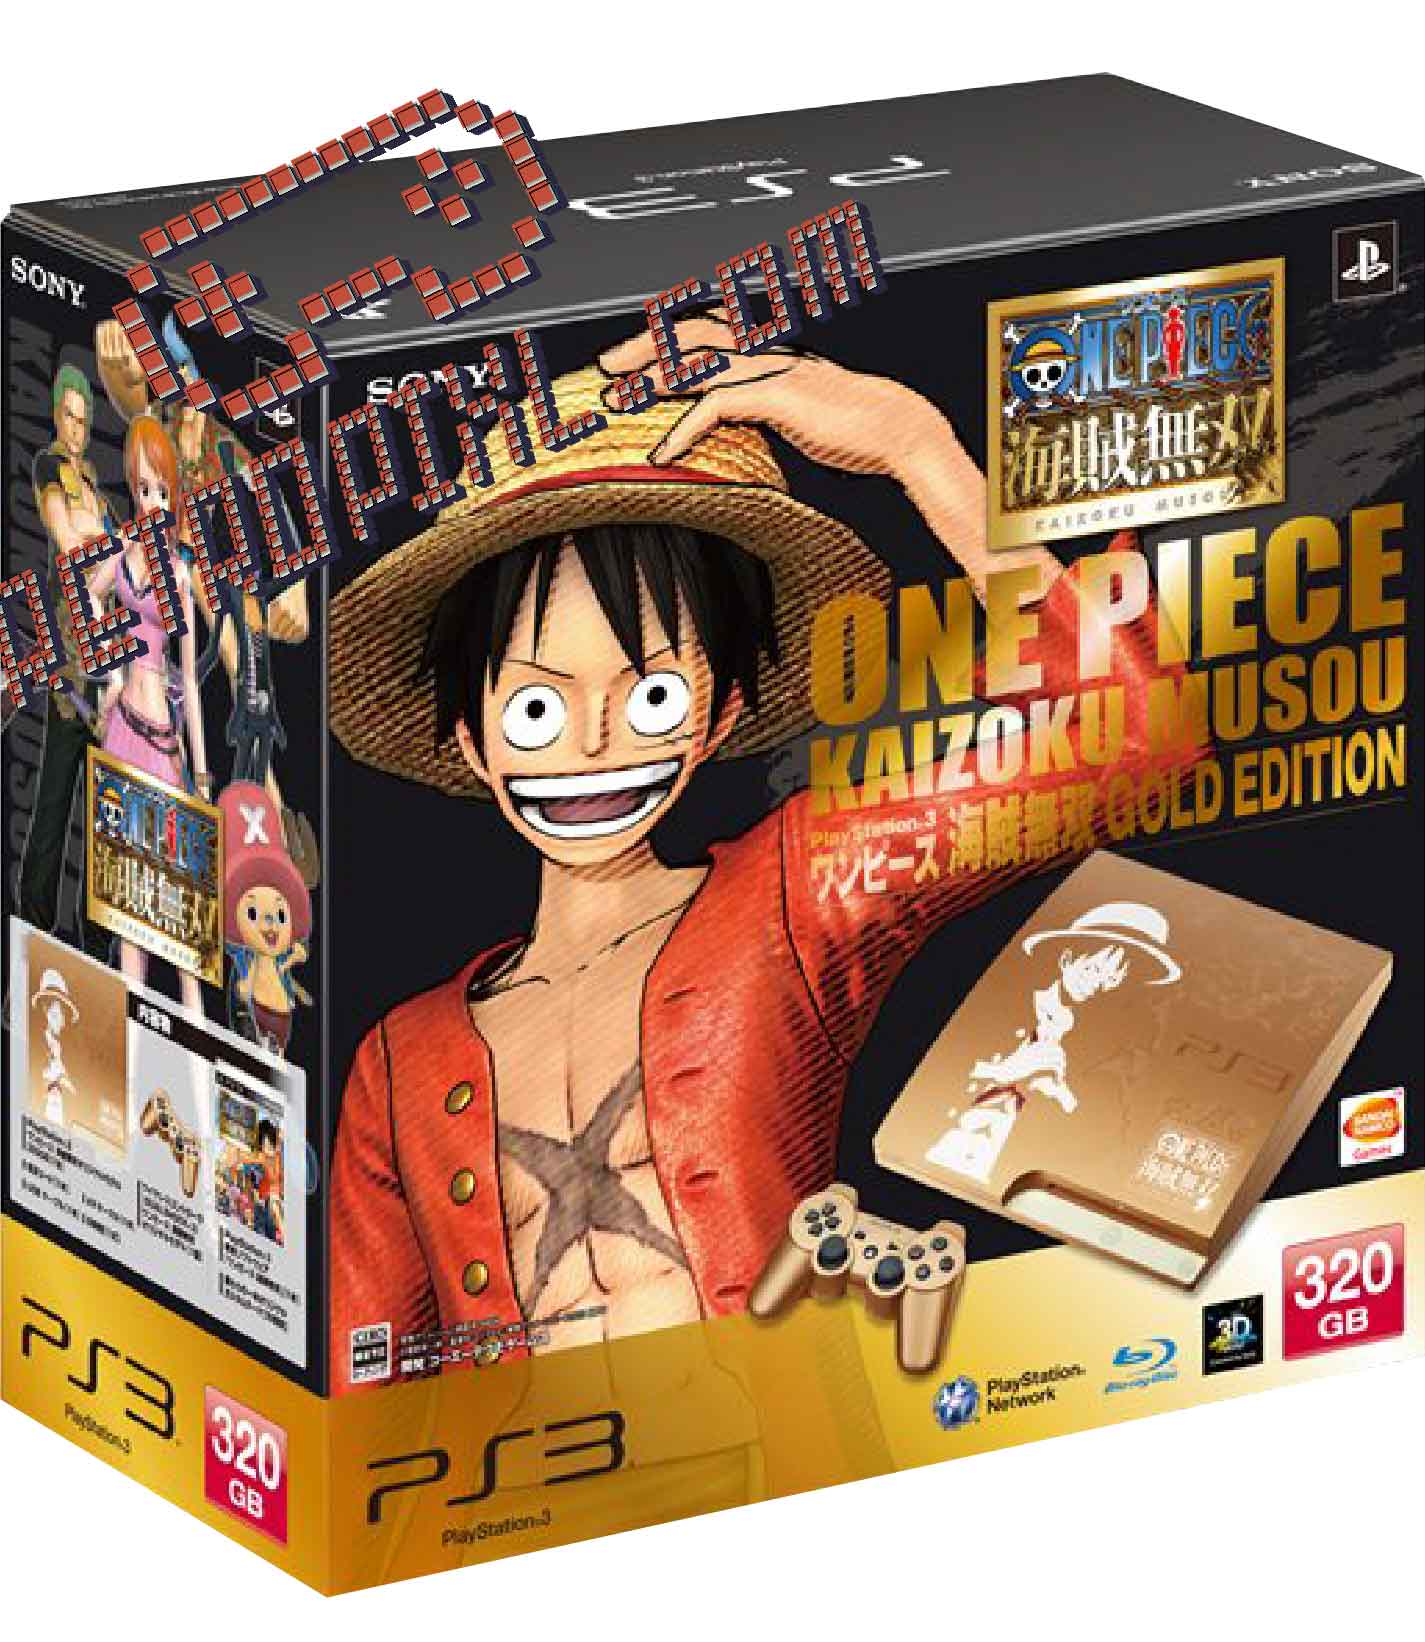 playstation 3 one piece